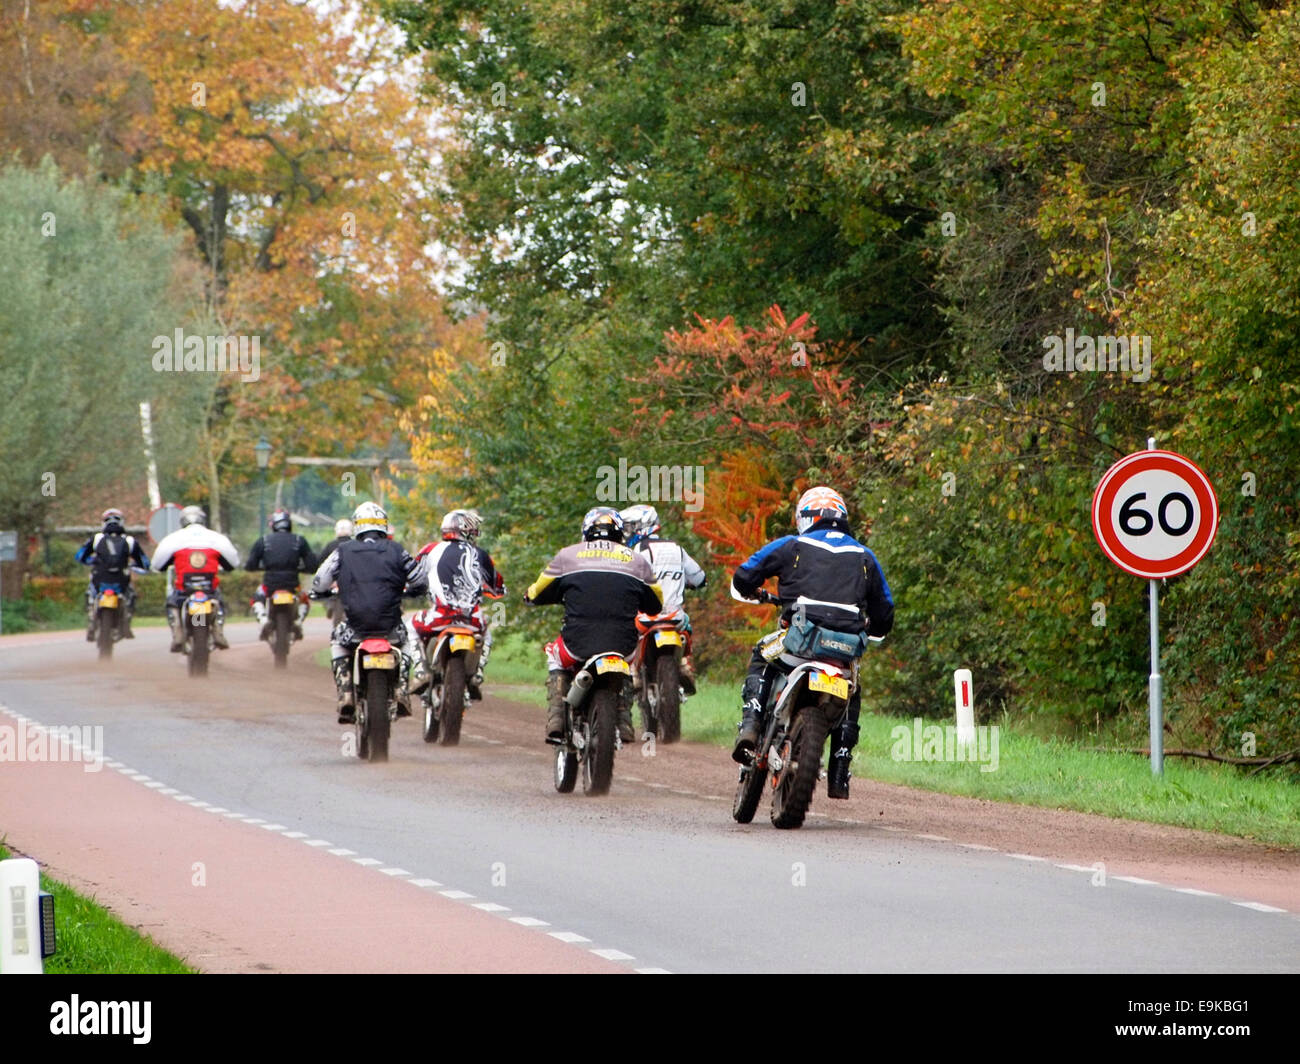 group of men on offroad enduro motorcycles passing 60 kmh speed limit sign in Ruurlo, the Netherlands Stock Photo